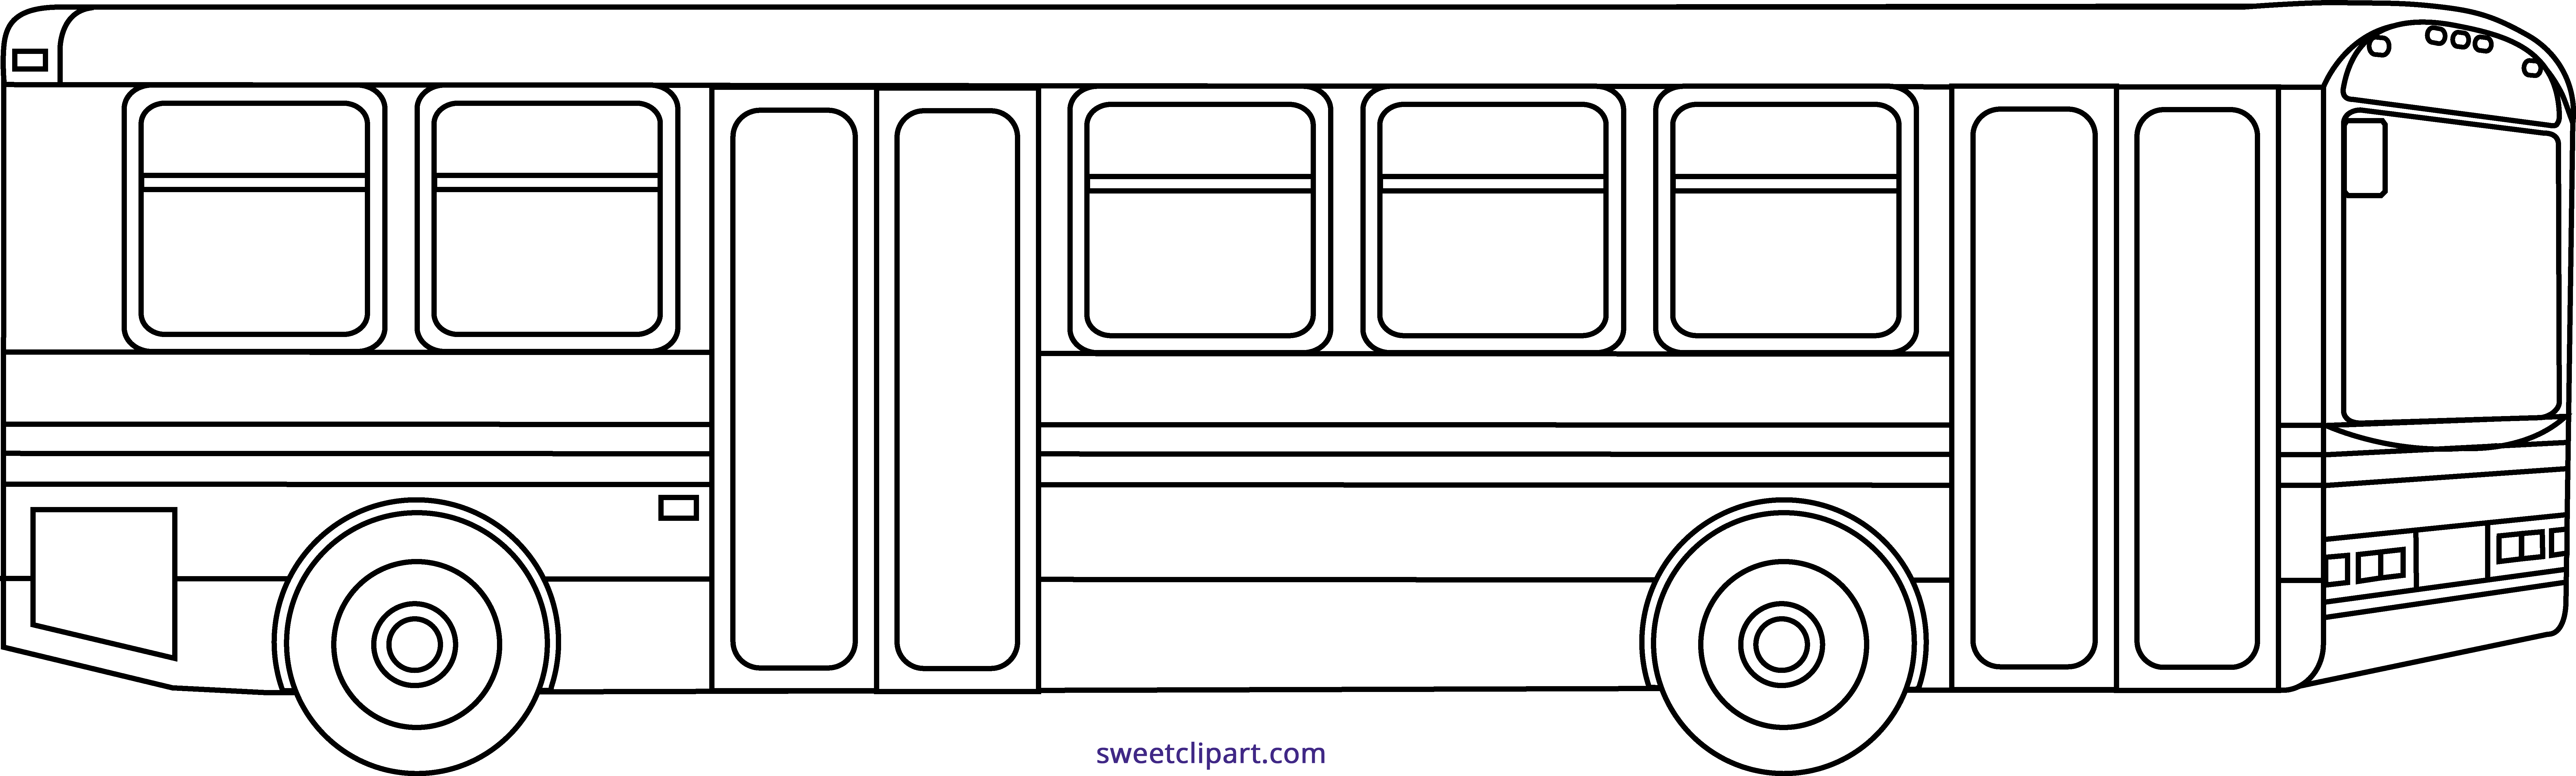 Bus clipart outline Bus outline Transparent FREE for download on